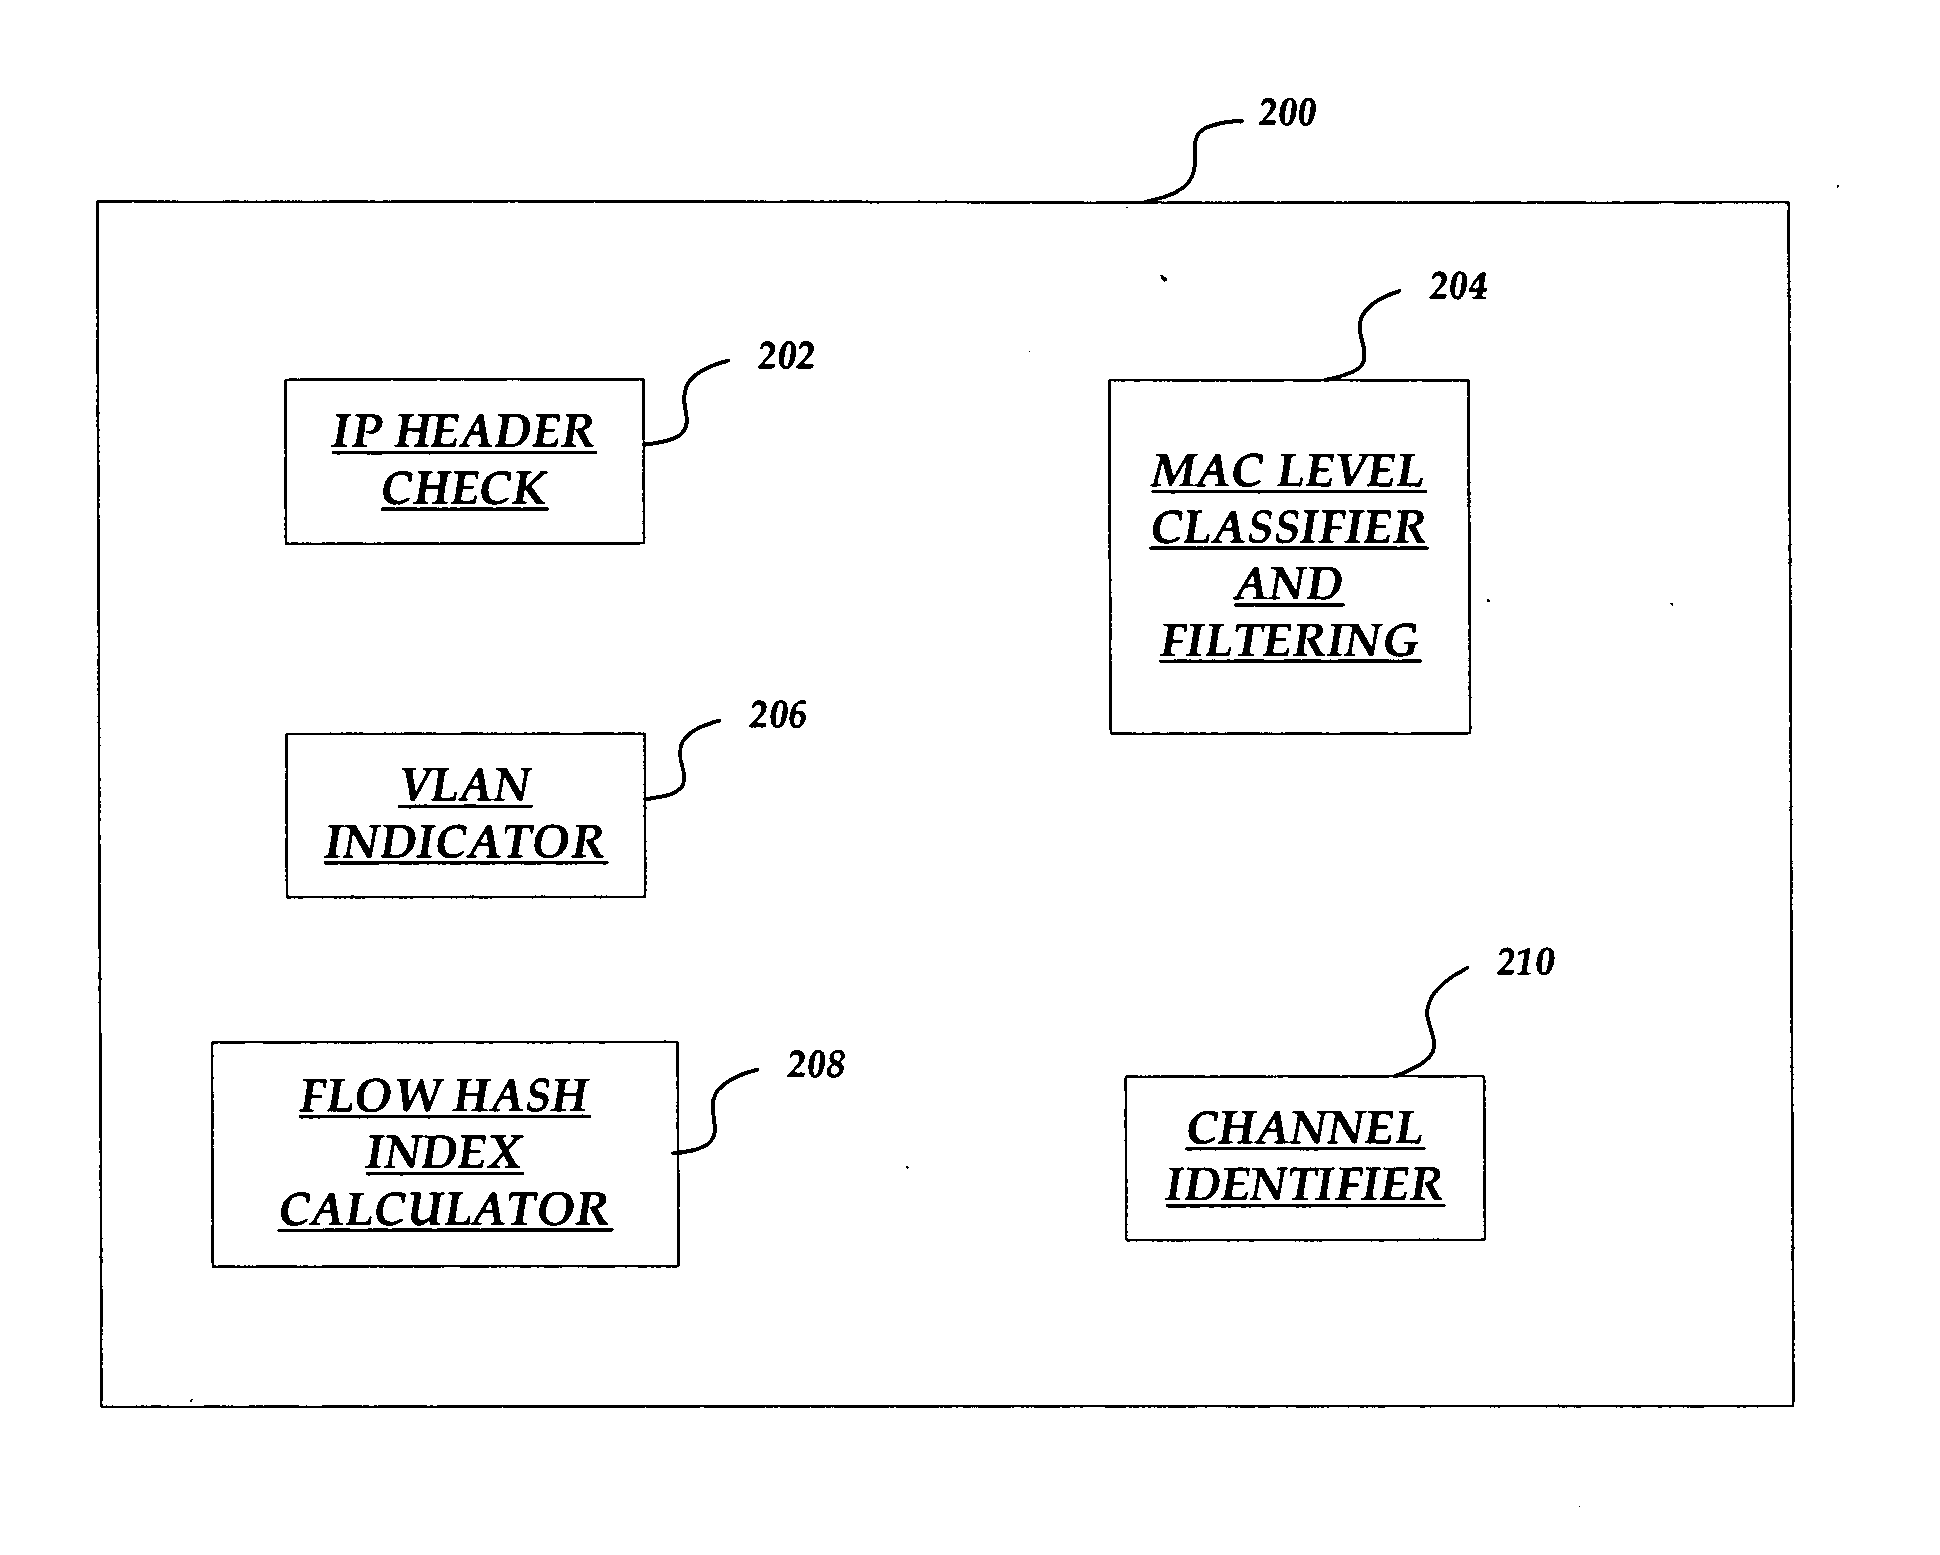 Primary control marker data structure